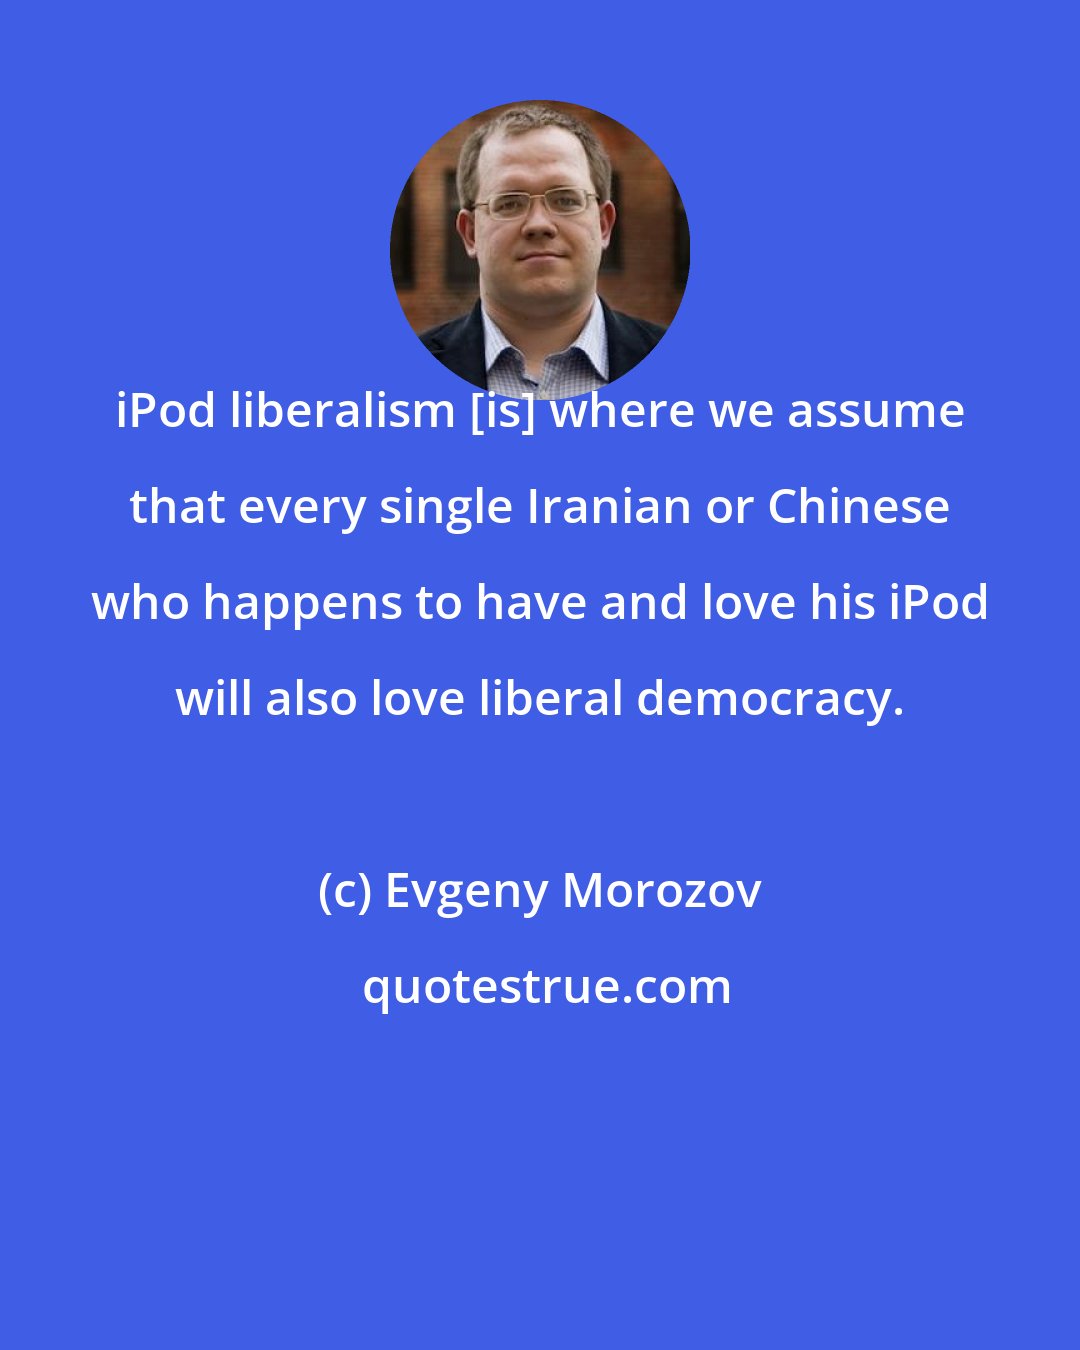 Evgeny Morozov: iPod liberalism [is] where we assume that every single Iranian or Chinese who happens to have and love his iPod will also love liberal democracy.